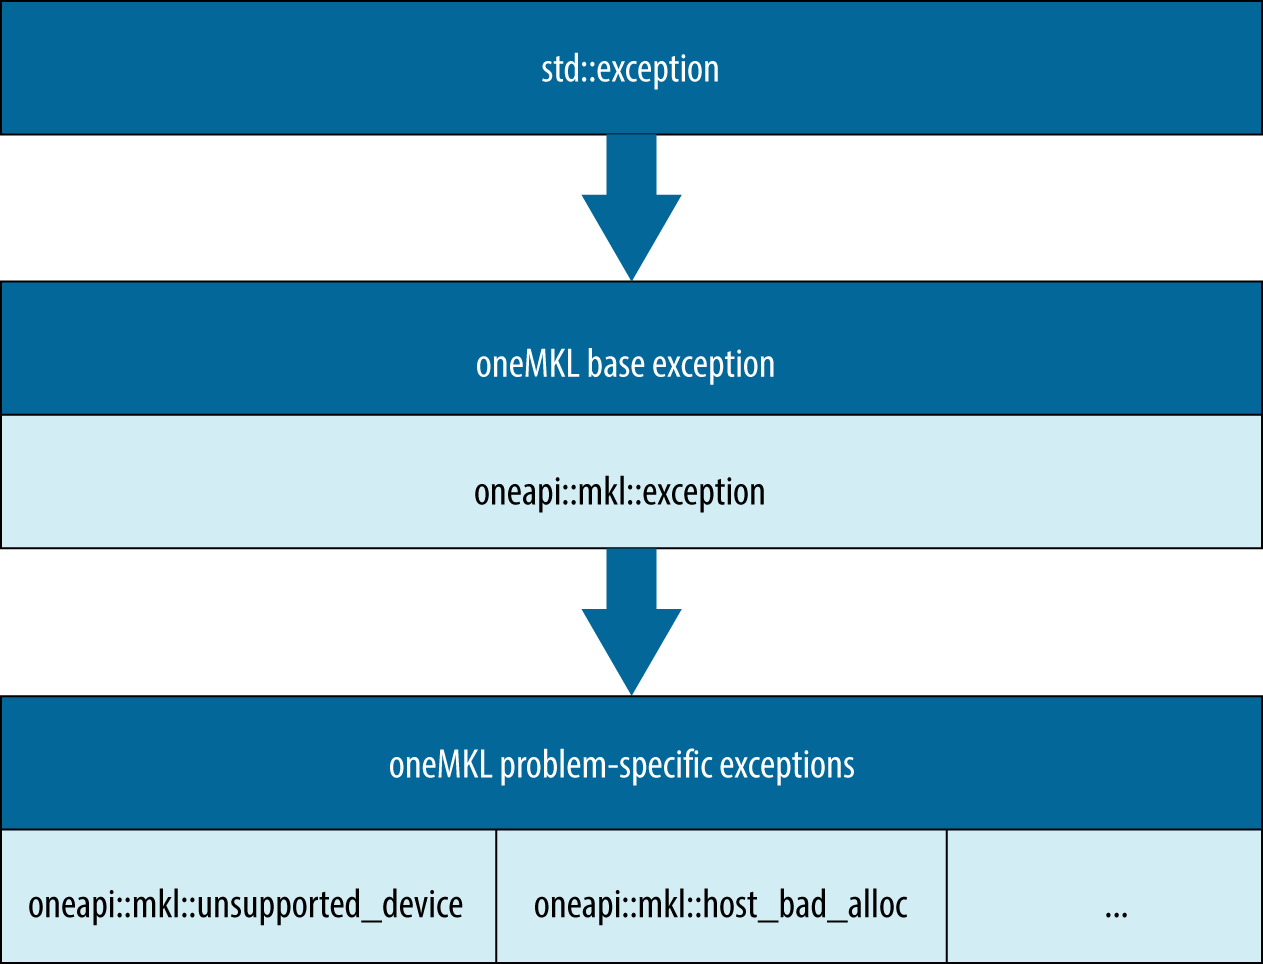 Hierarchy of oneMKL exceptions